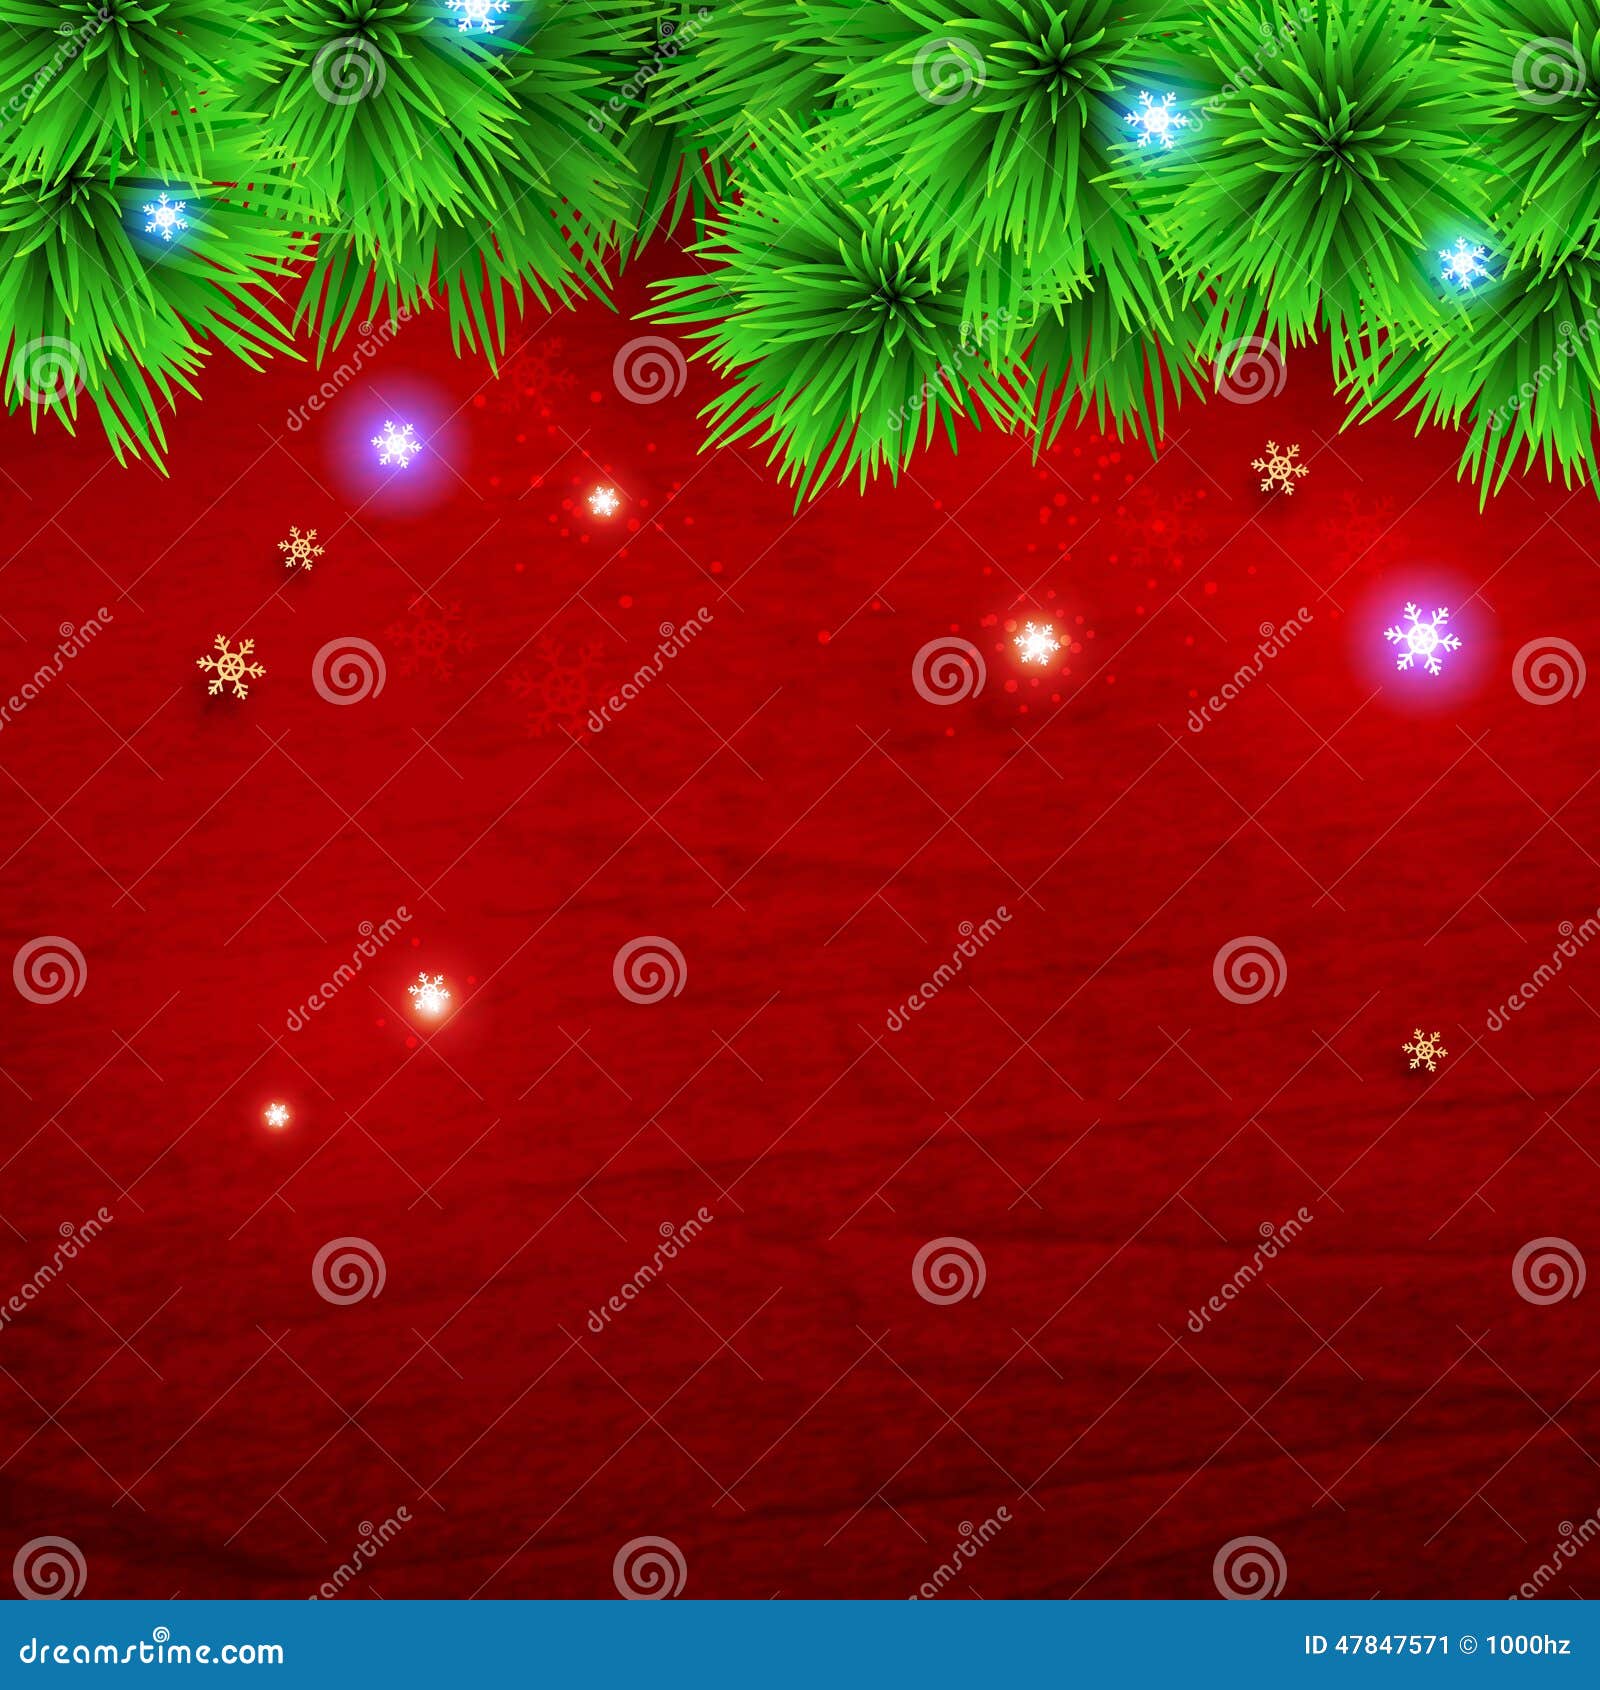 Christmas background stock vector. Illustration of happy - 47847571